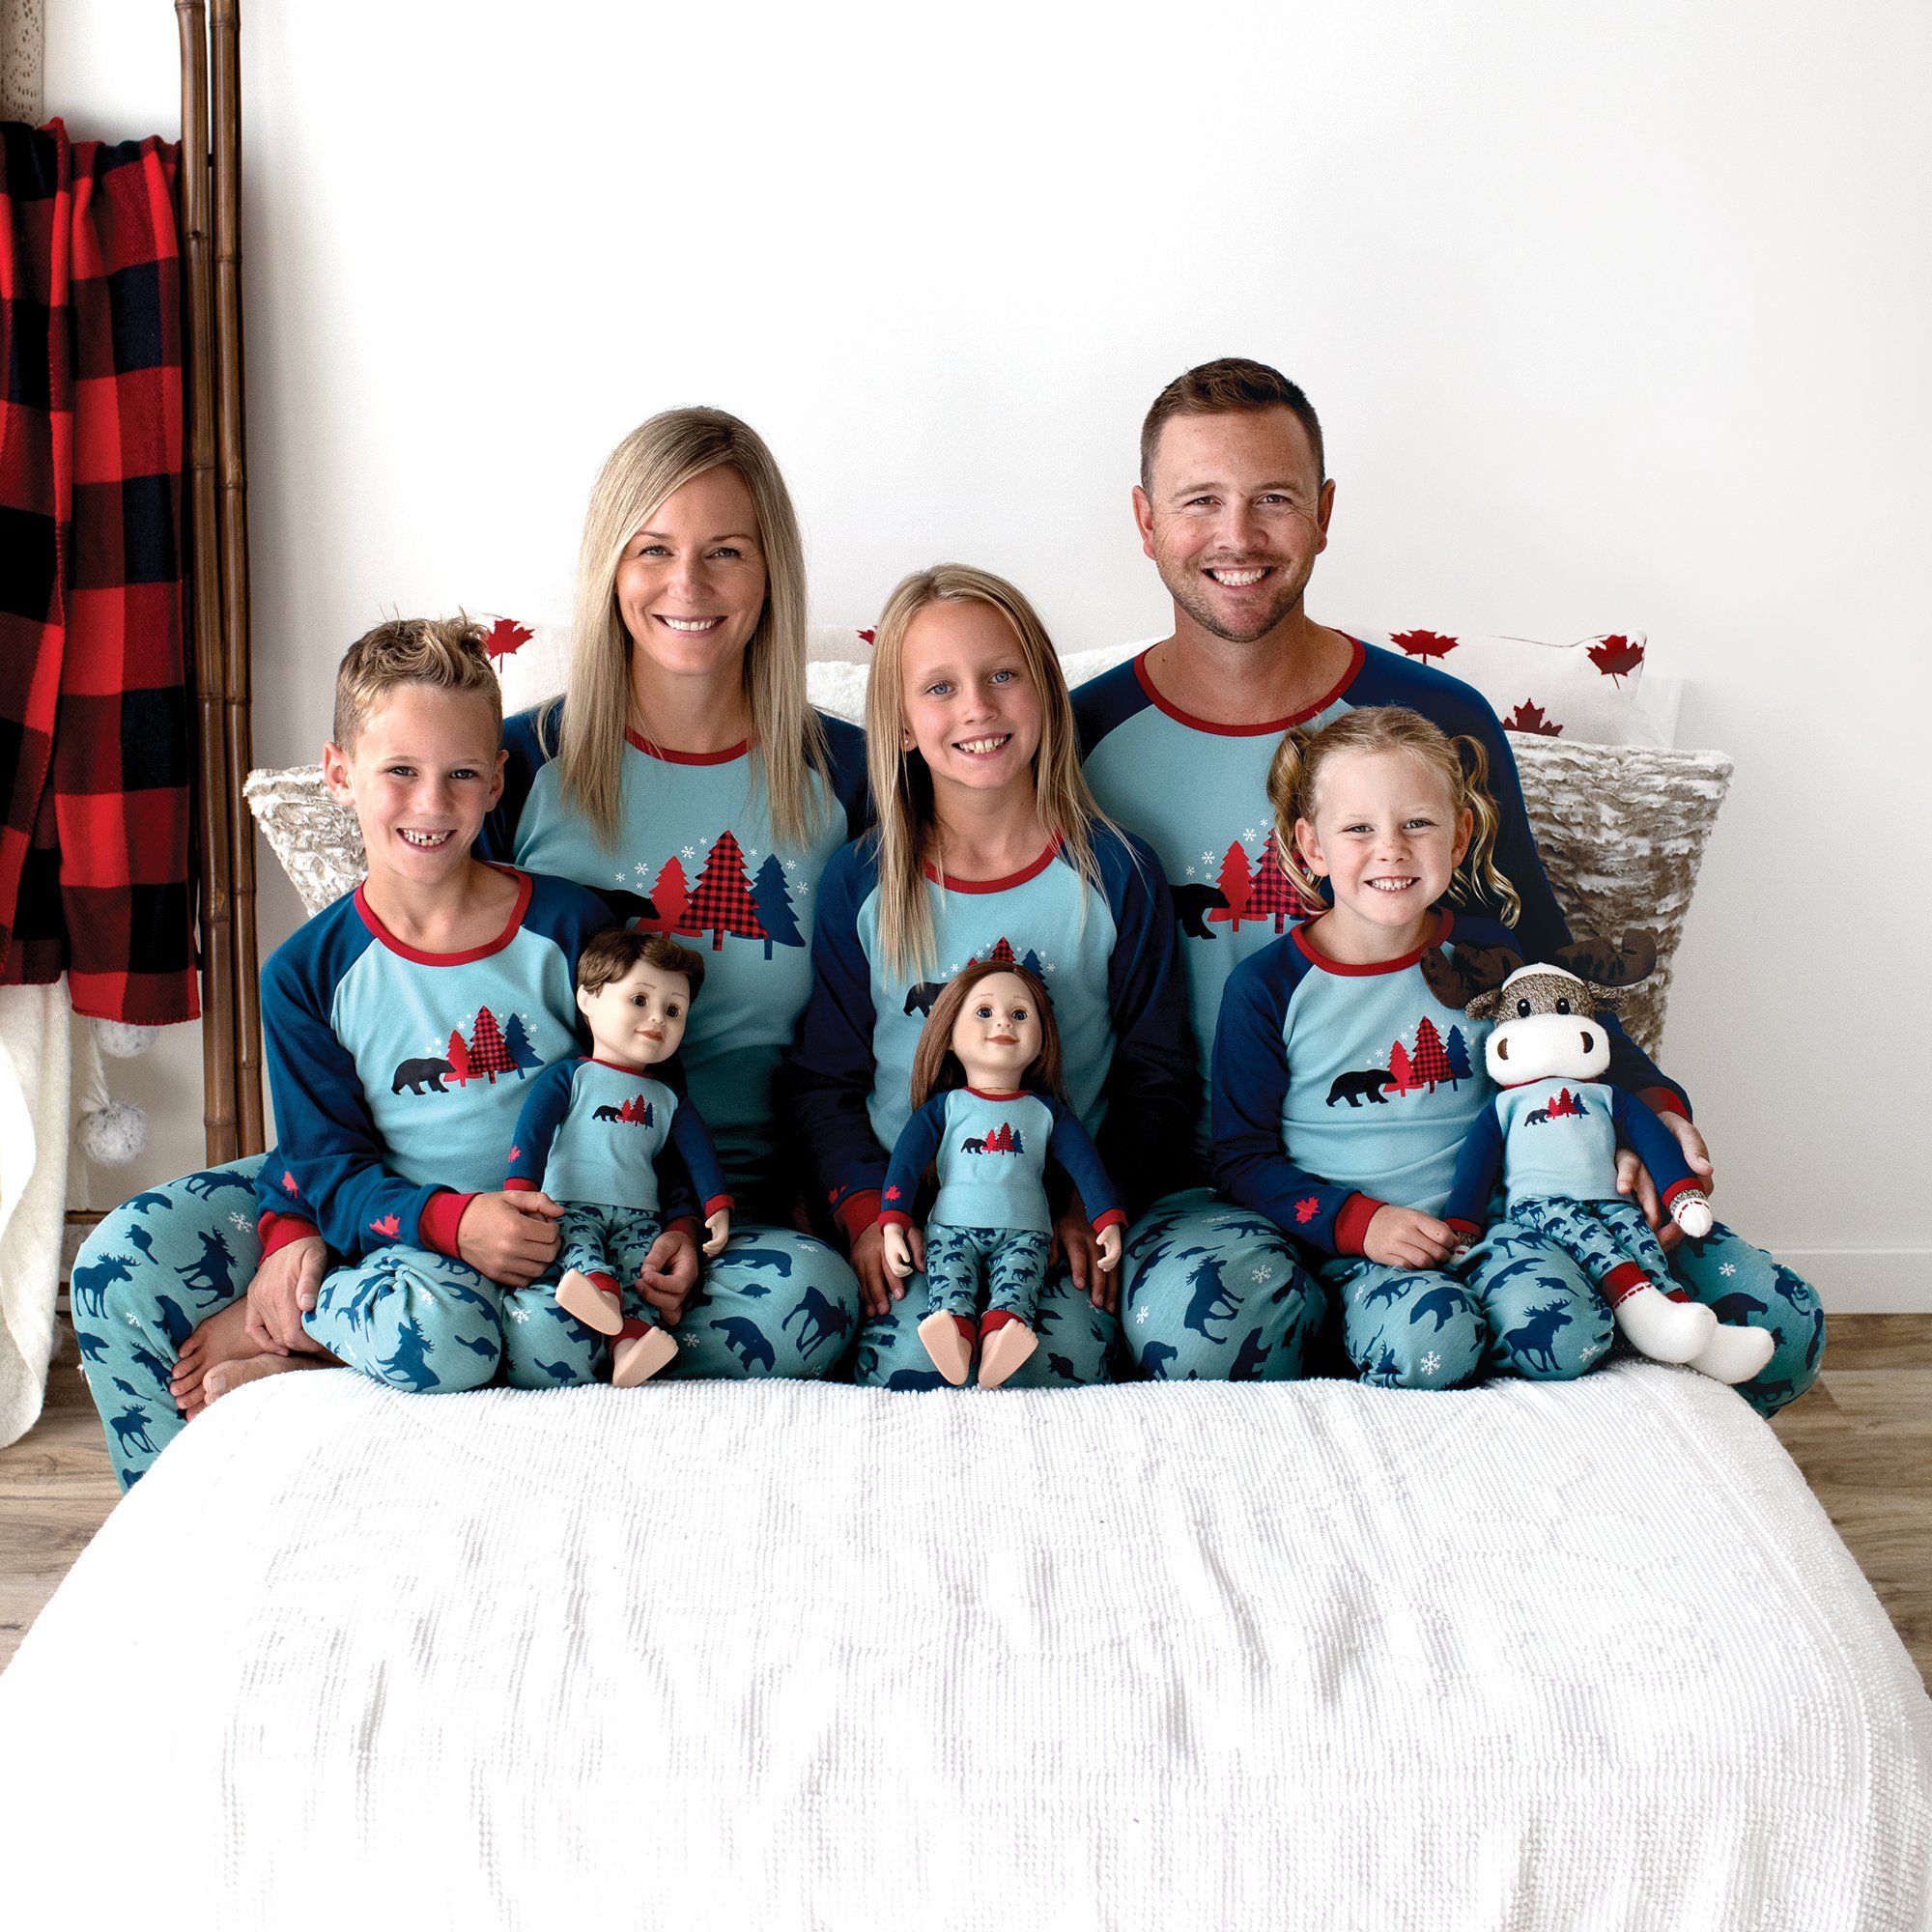 Blue Spruce PJs for Kids: The whole family can match your 18 inch doll